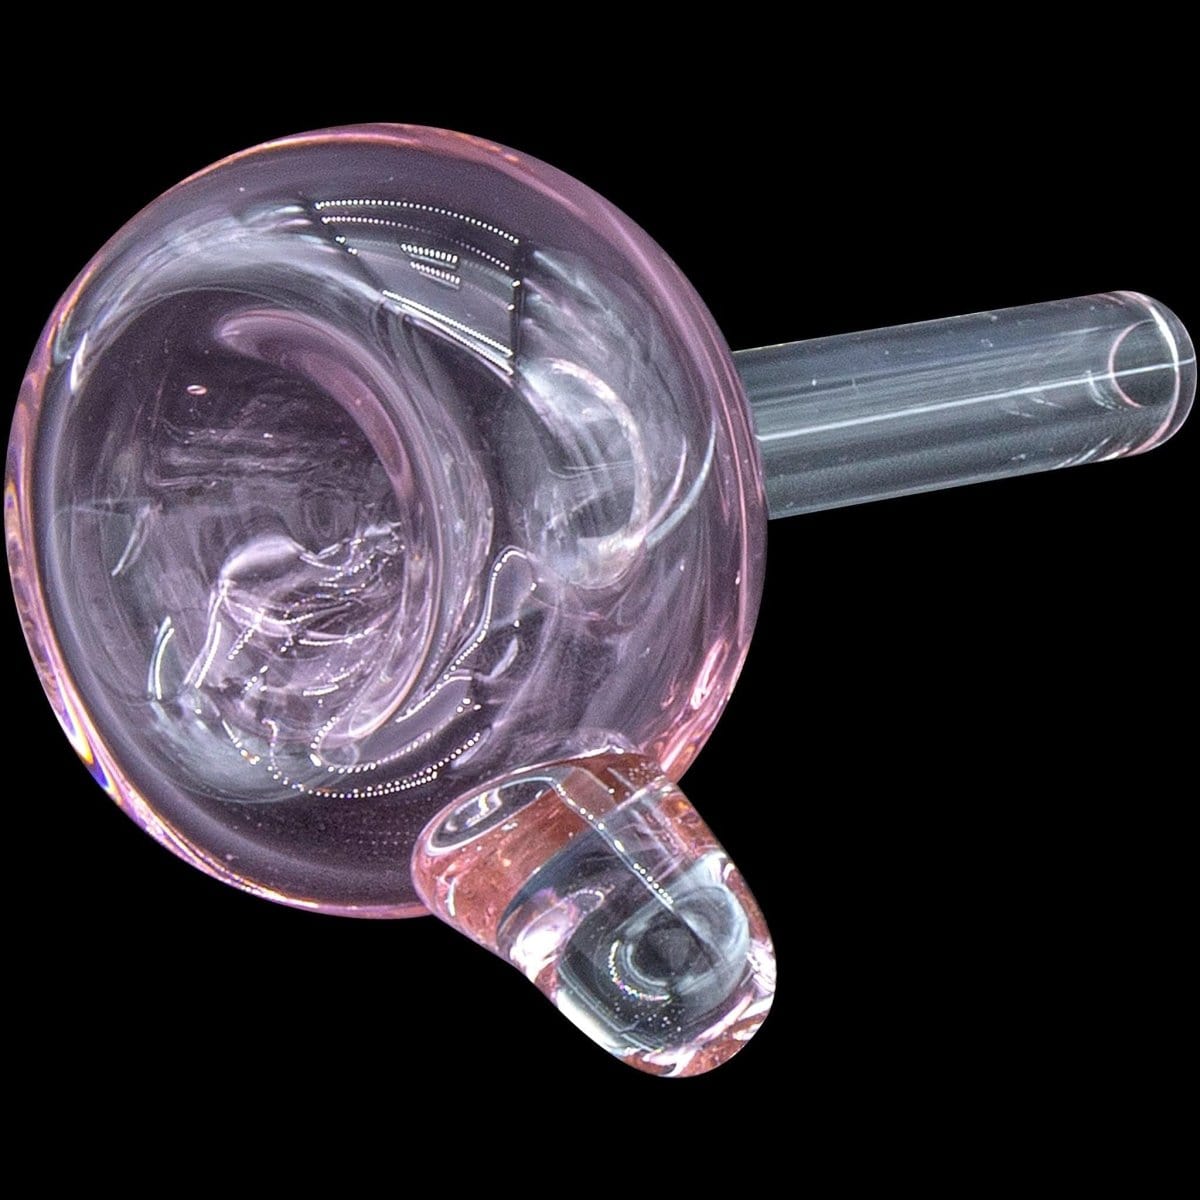 LA Pipes Smoking Accessory Pink Bubble Bowl 9mm Pull-Stem Slide